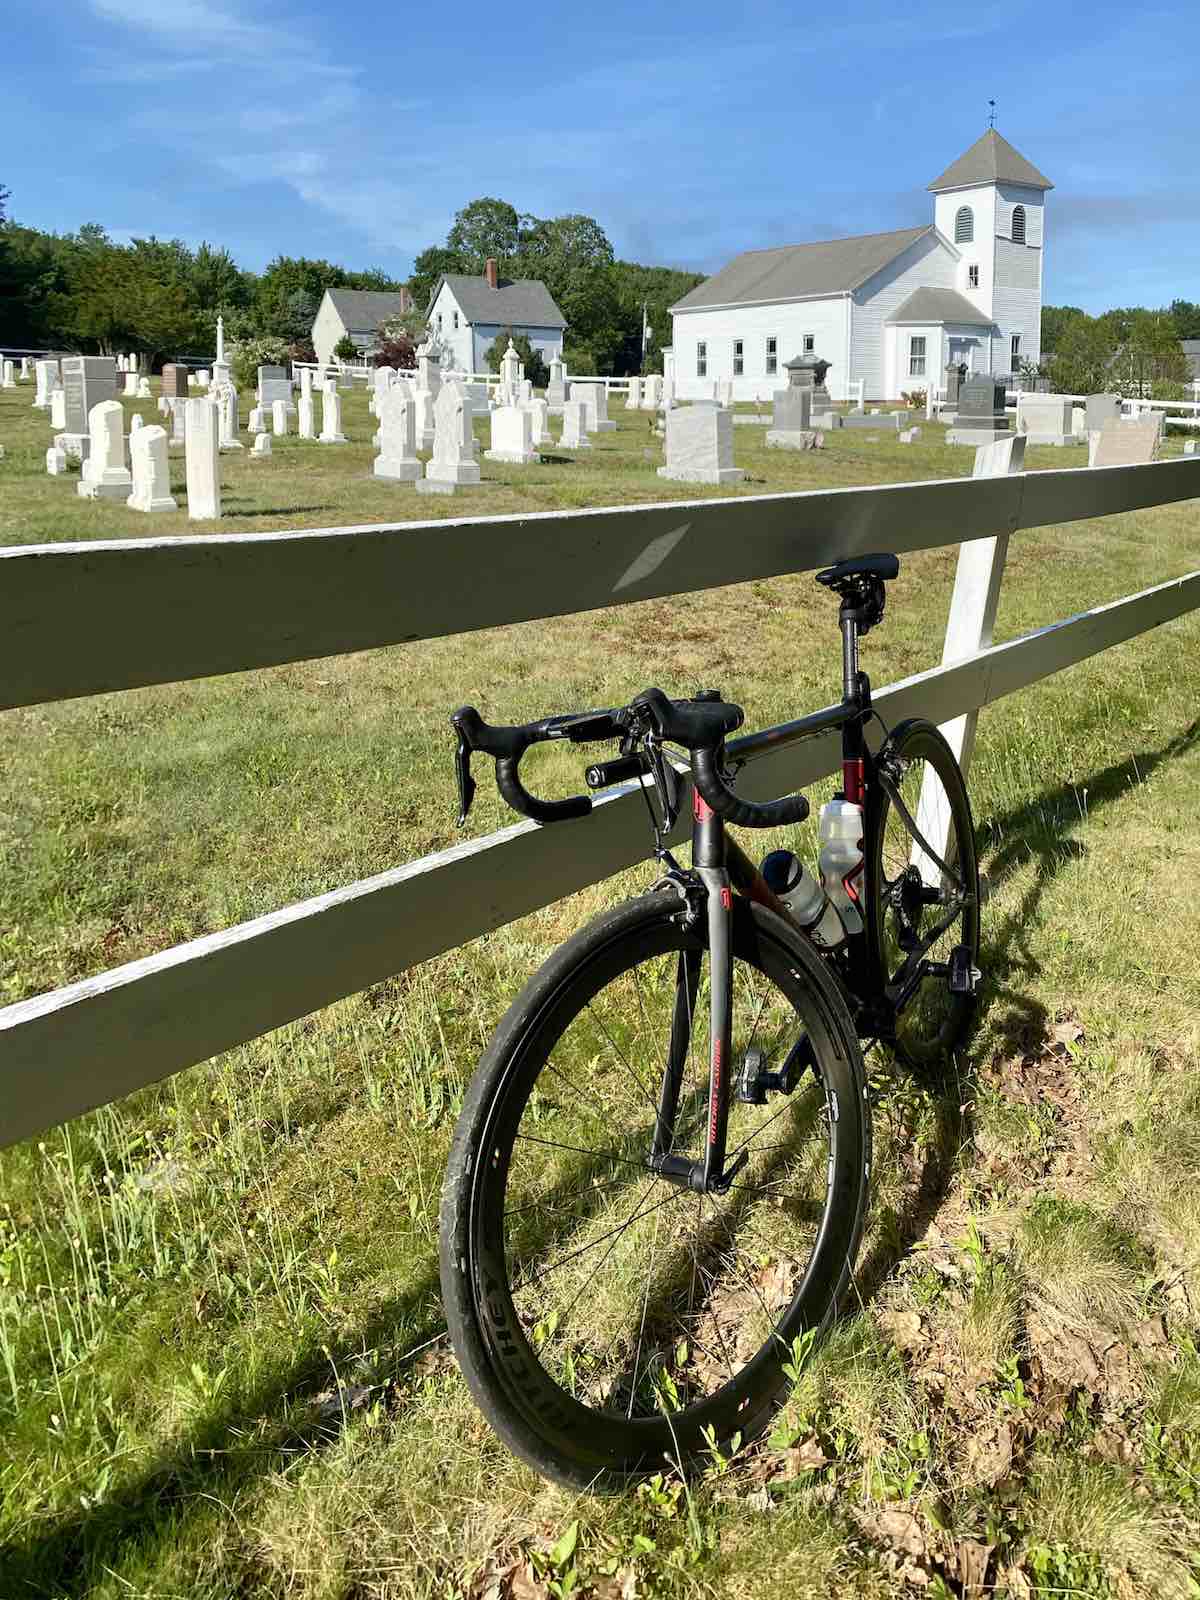 bikerumor pic of the day bicycle leaning against fence surrounding a new england church and cemetery.